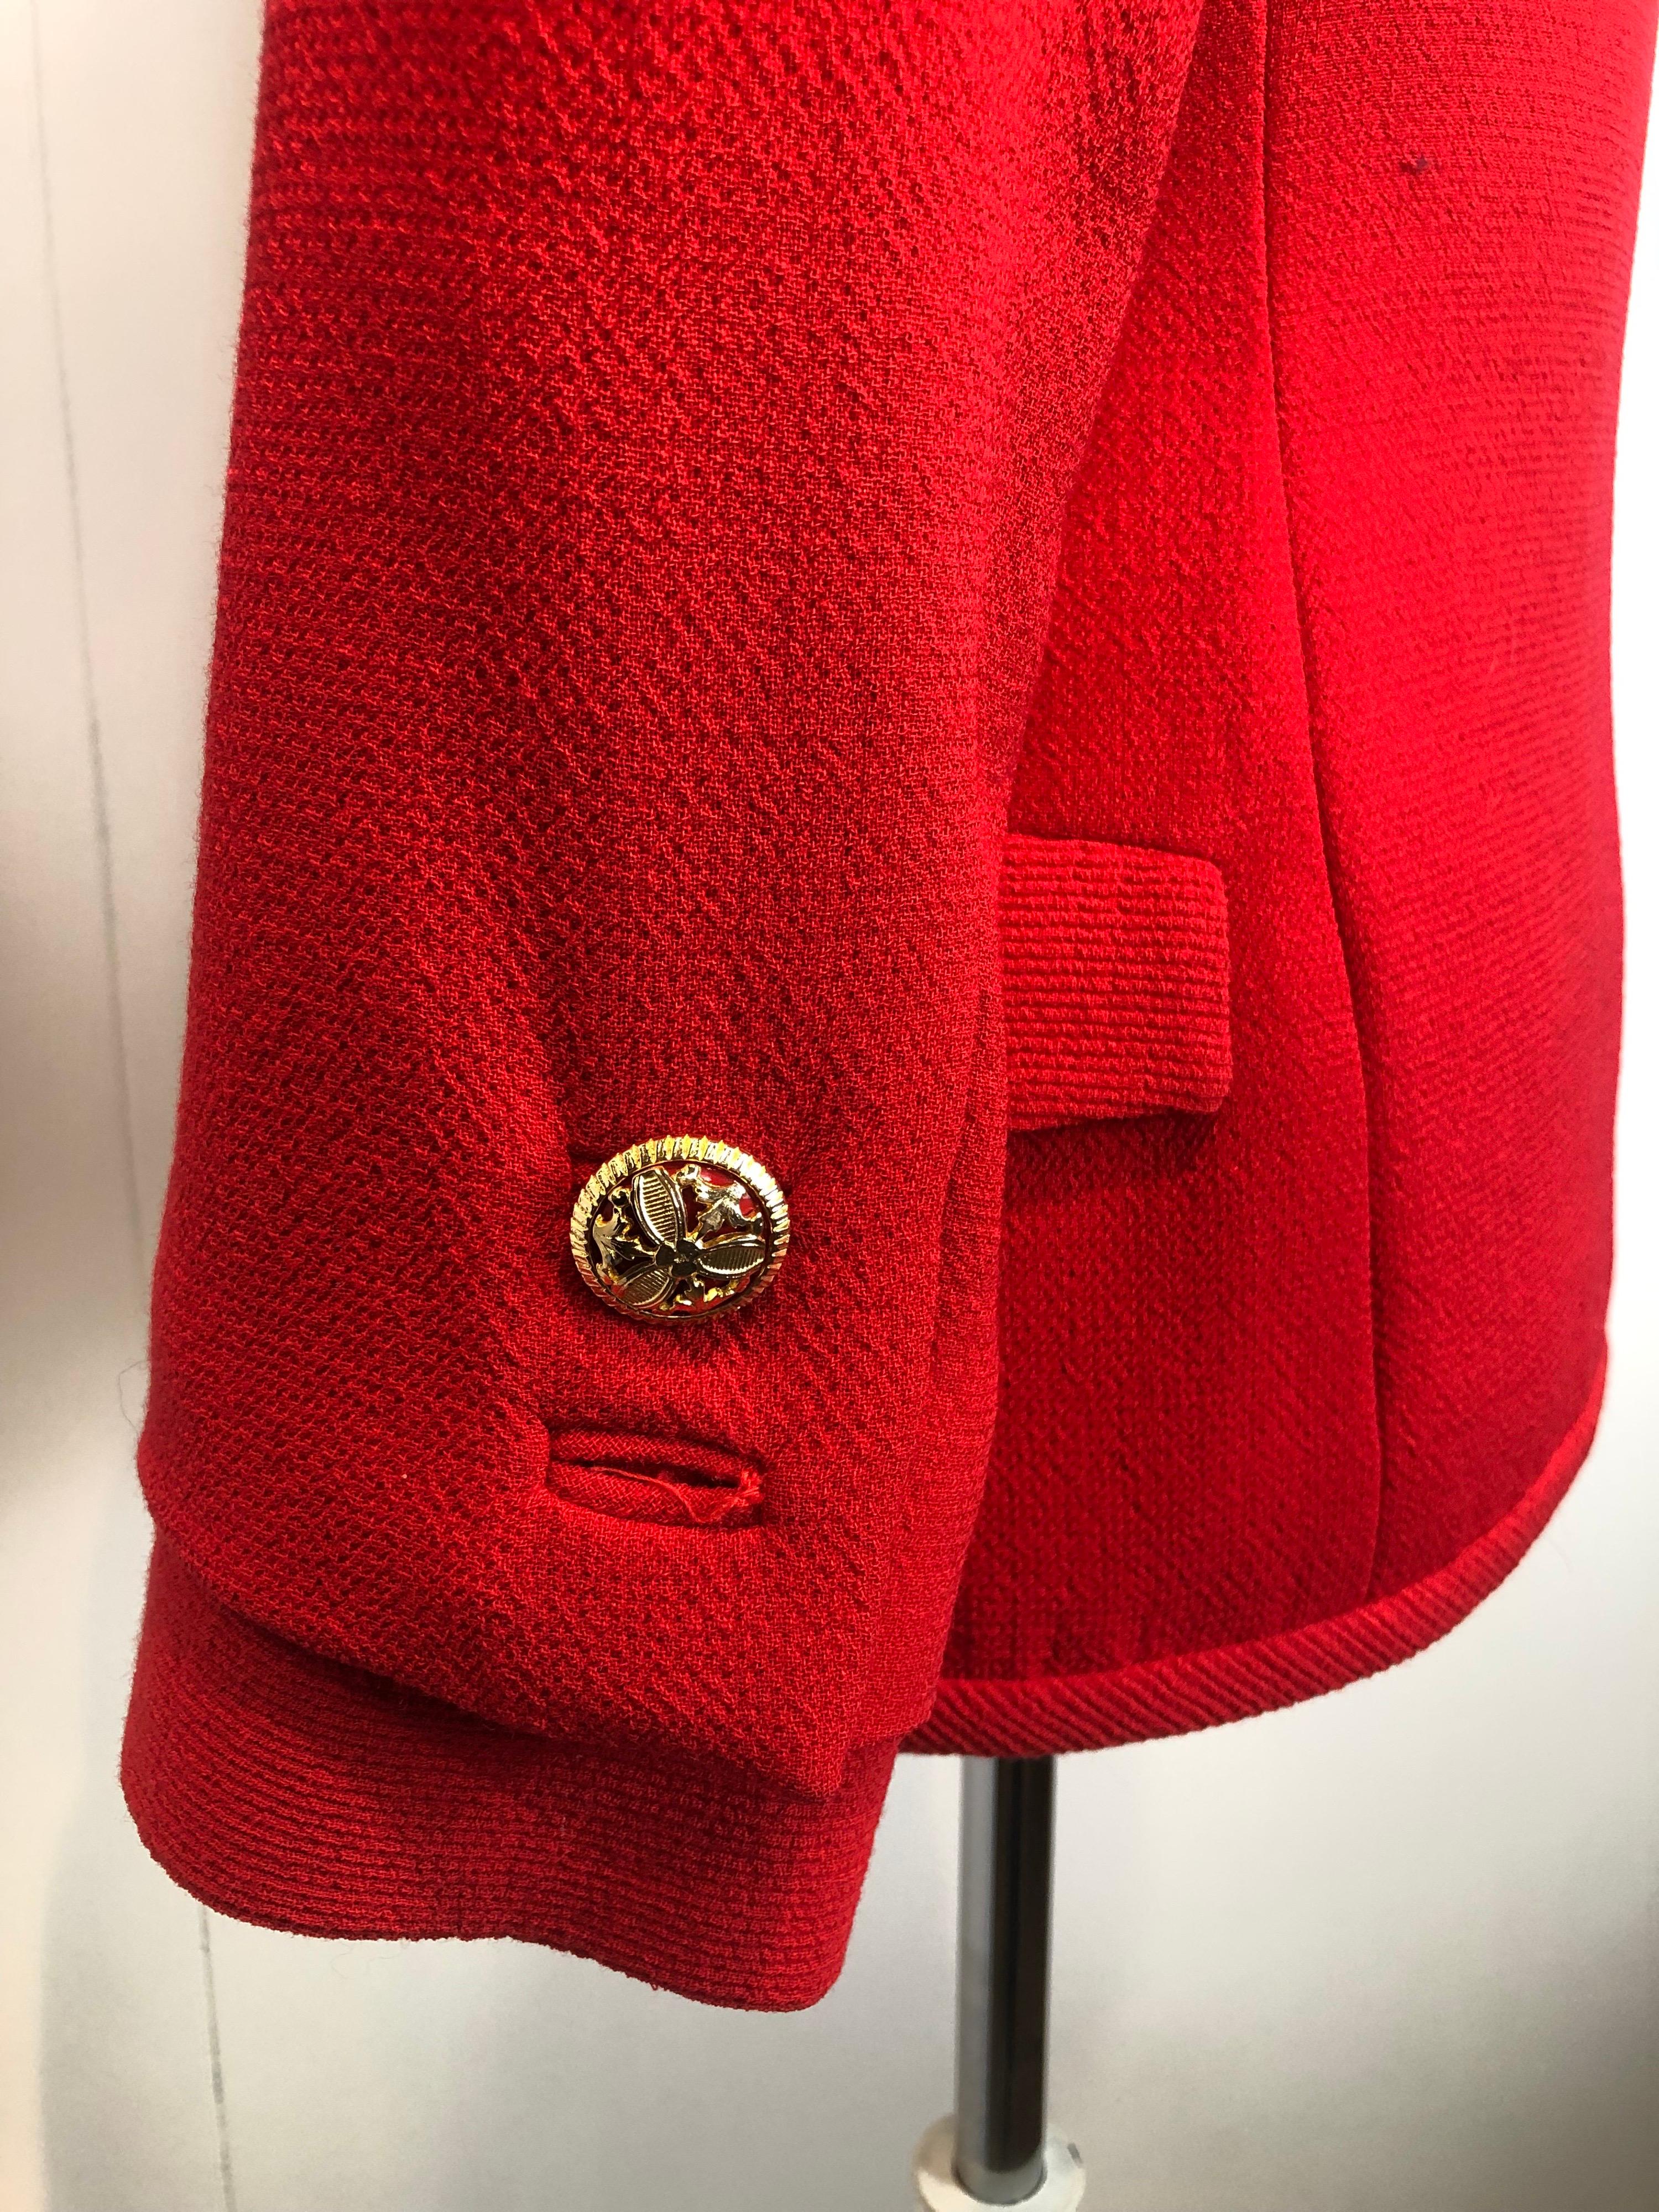 Gianni Versace 80s red wool jacket In Good Condition For Sale In Carnate, IT